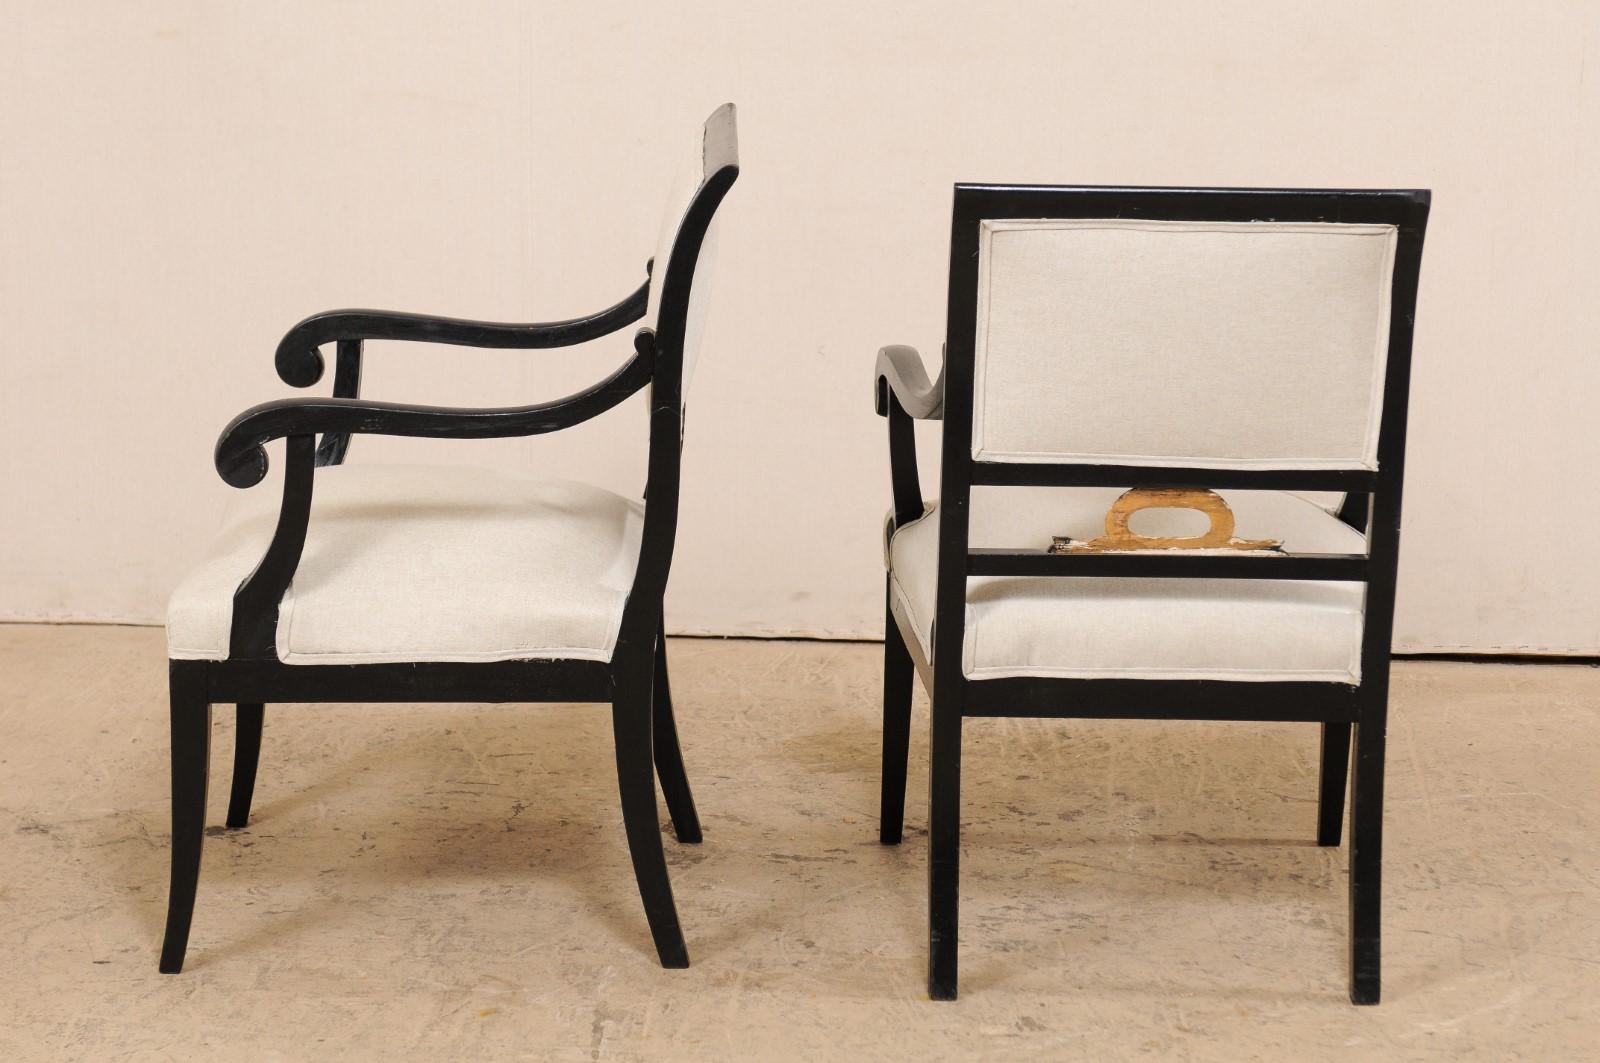 Pair of Swedish Empire Armchairs in Black w/Gold Accents from the Mid-19th C. For Sale 1